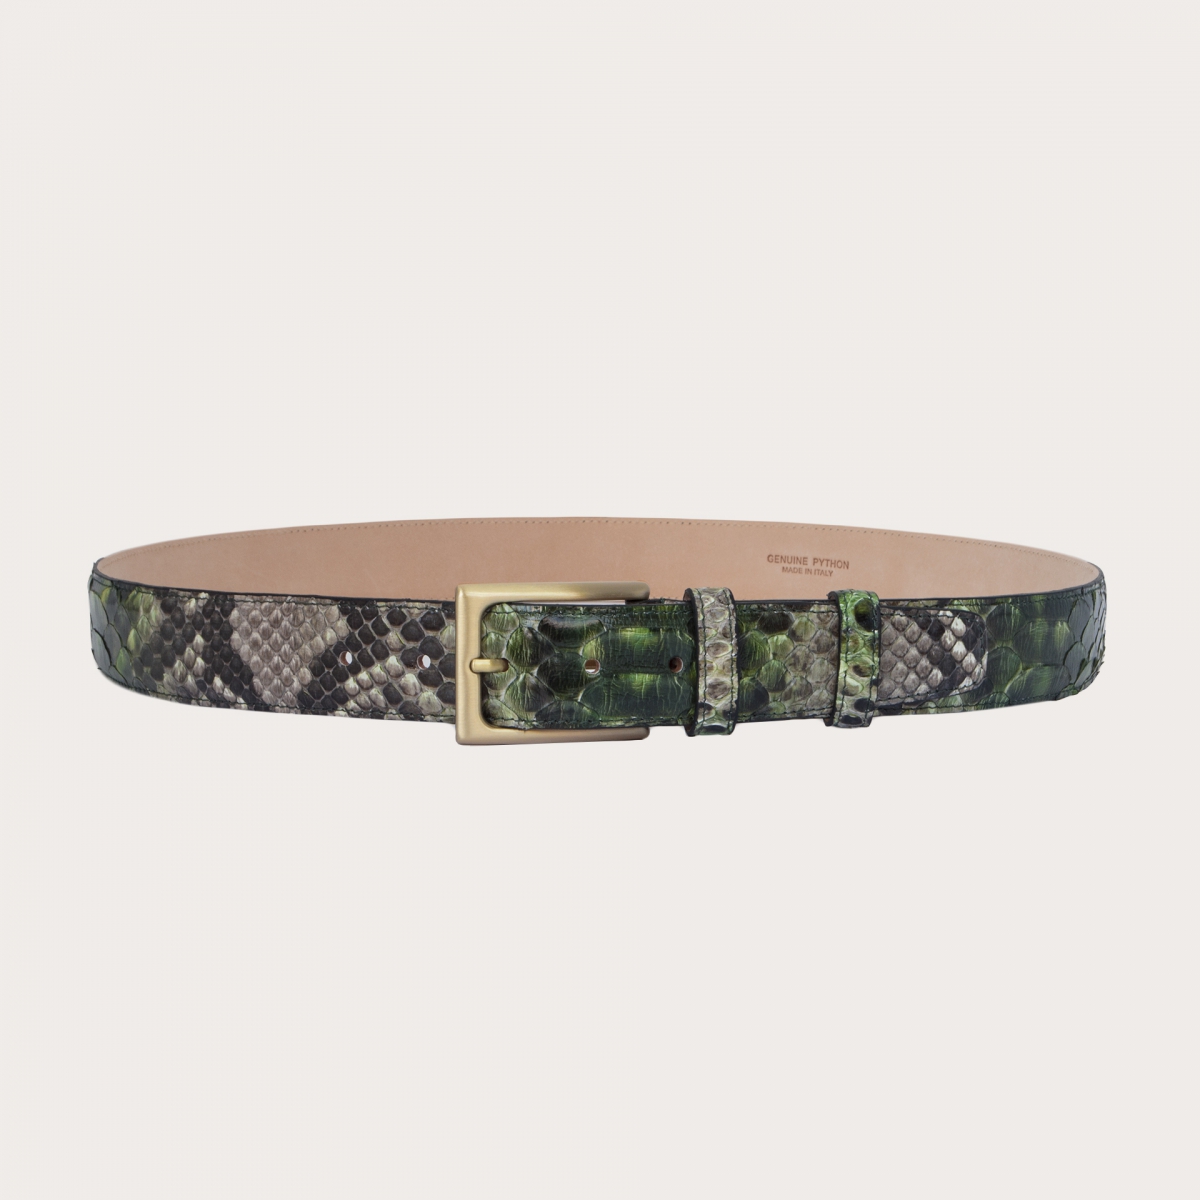 BRUCLE Hand-buffed H35 python leather belt with gold satin buckle, shades of green and mud